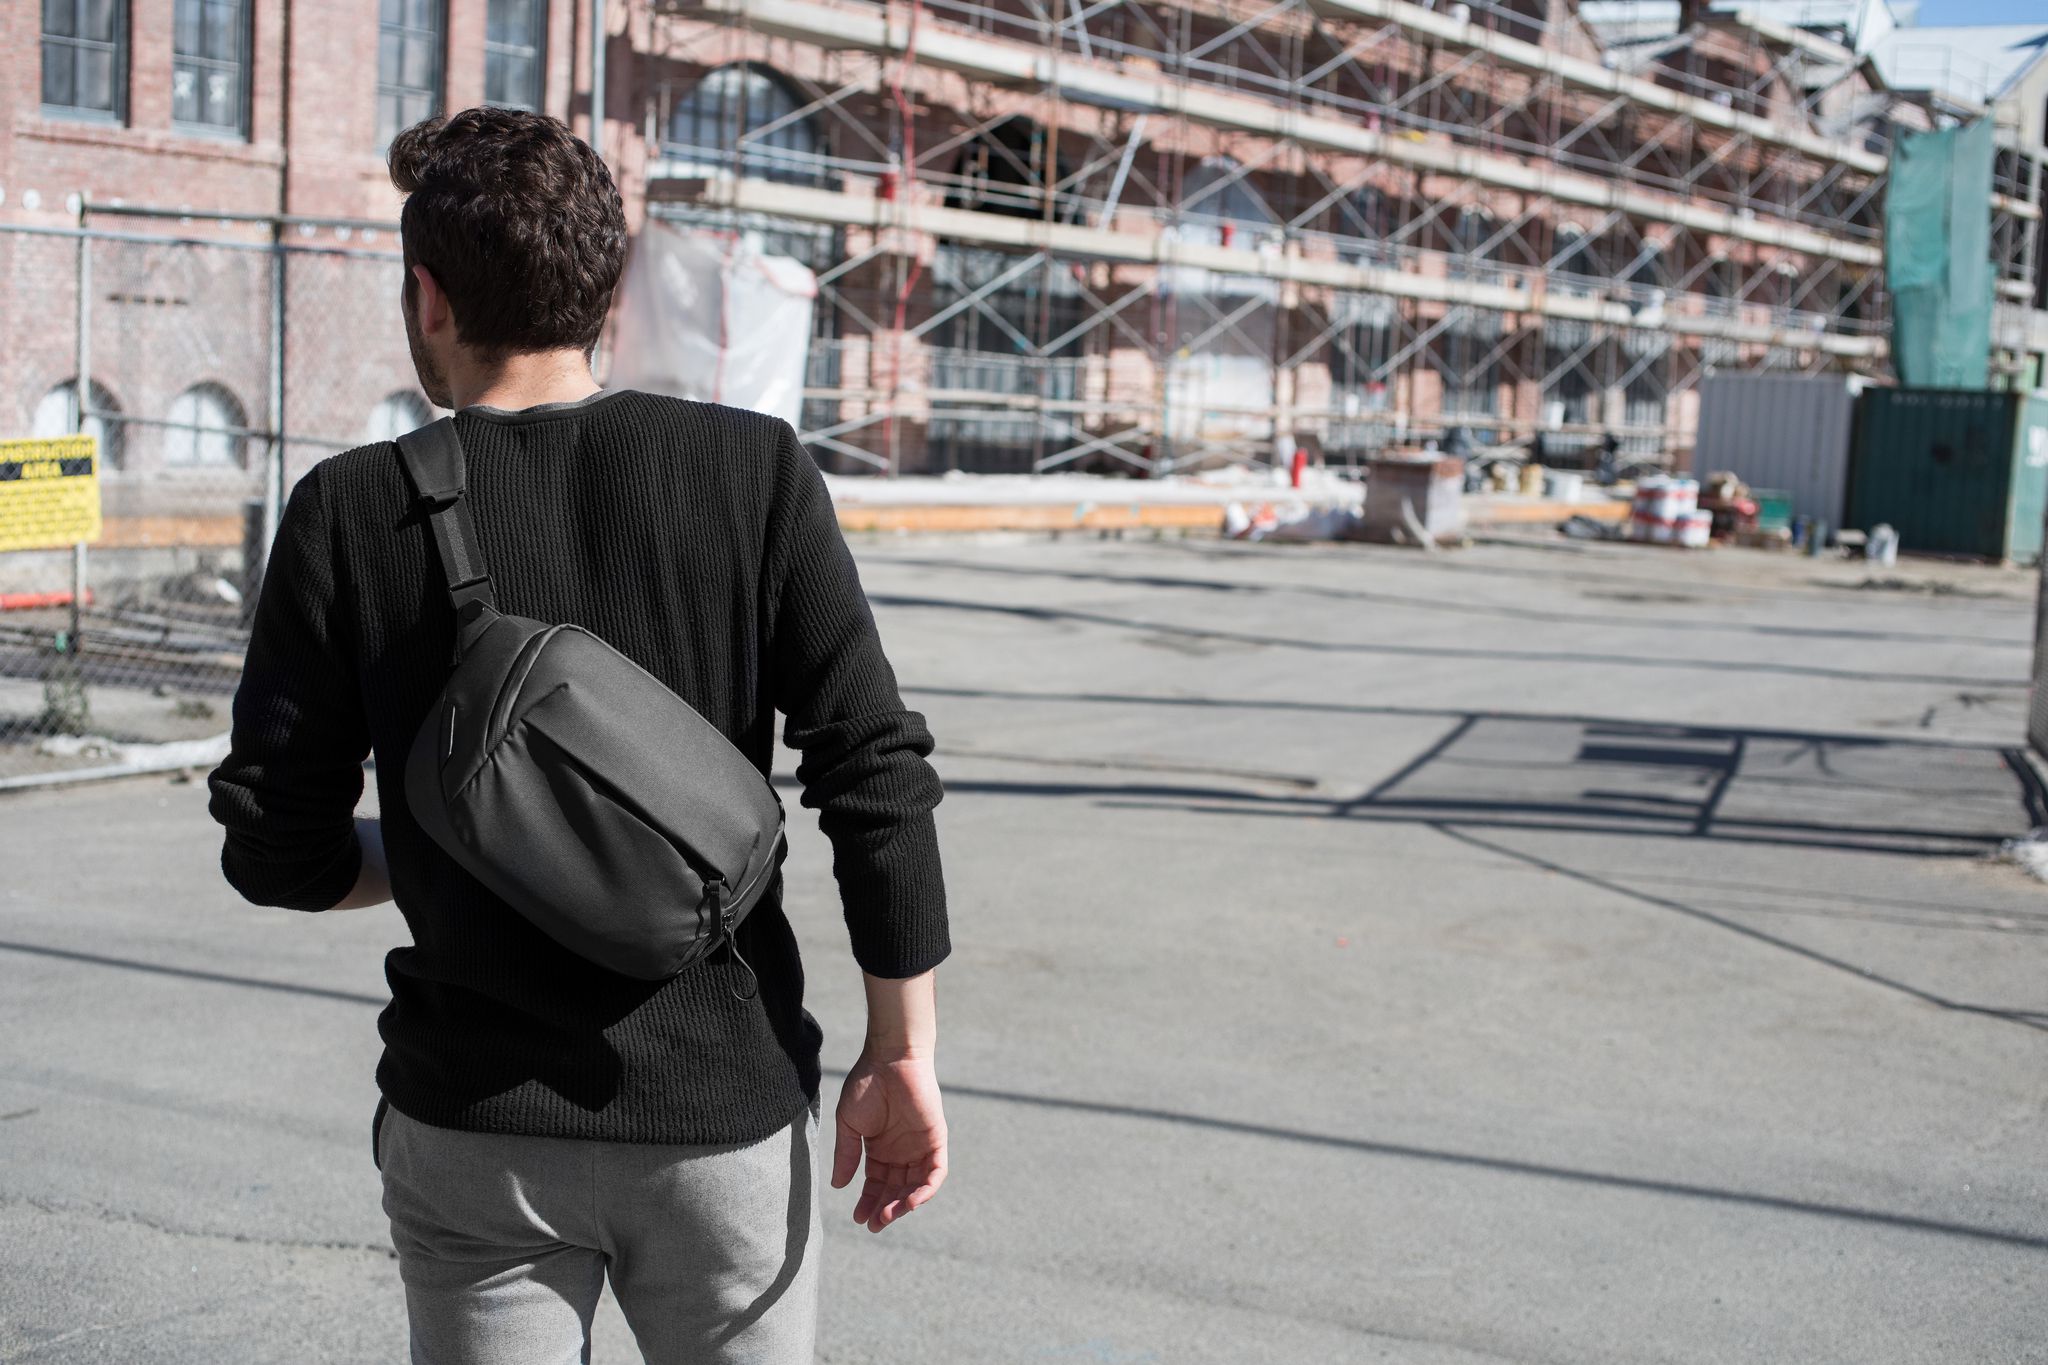 Peak Design’s new 5L Everyday Sling is a small and stylish camera bag ...